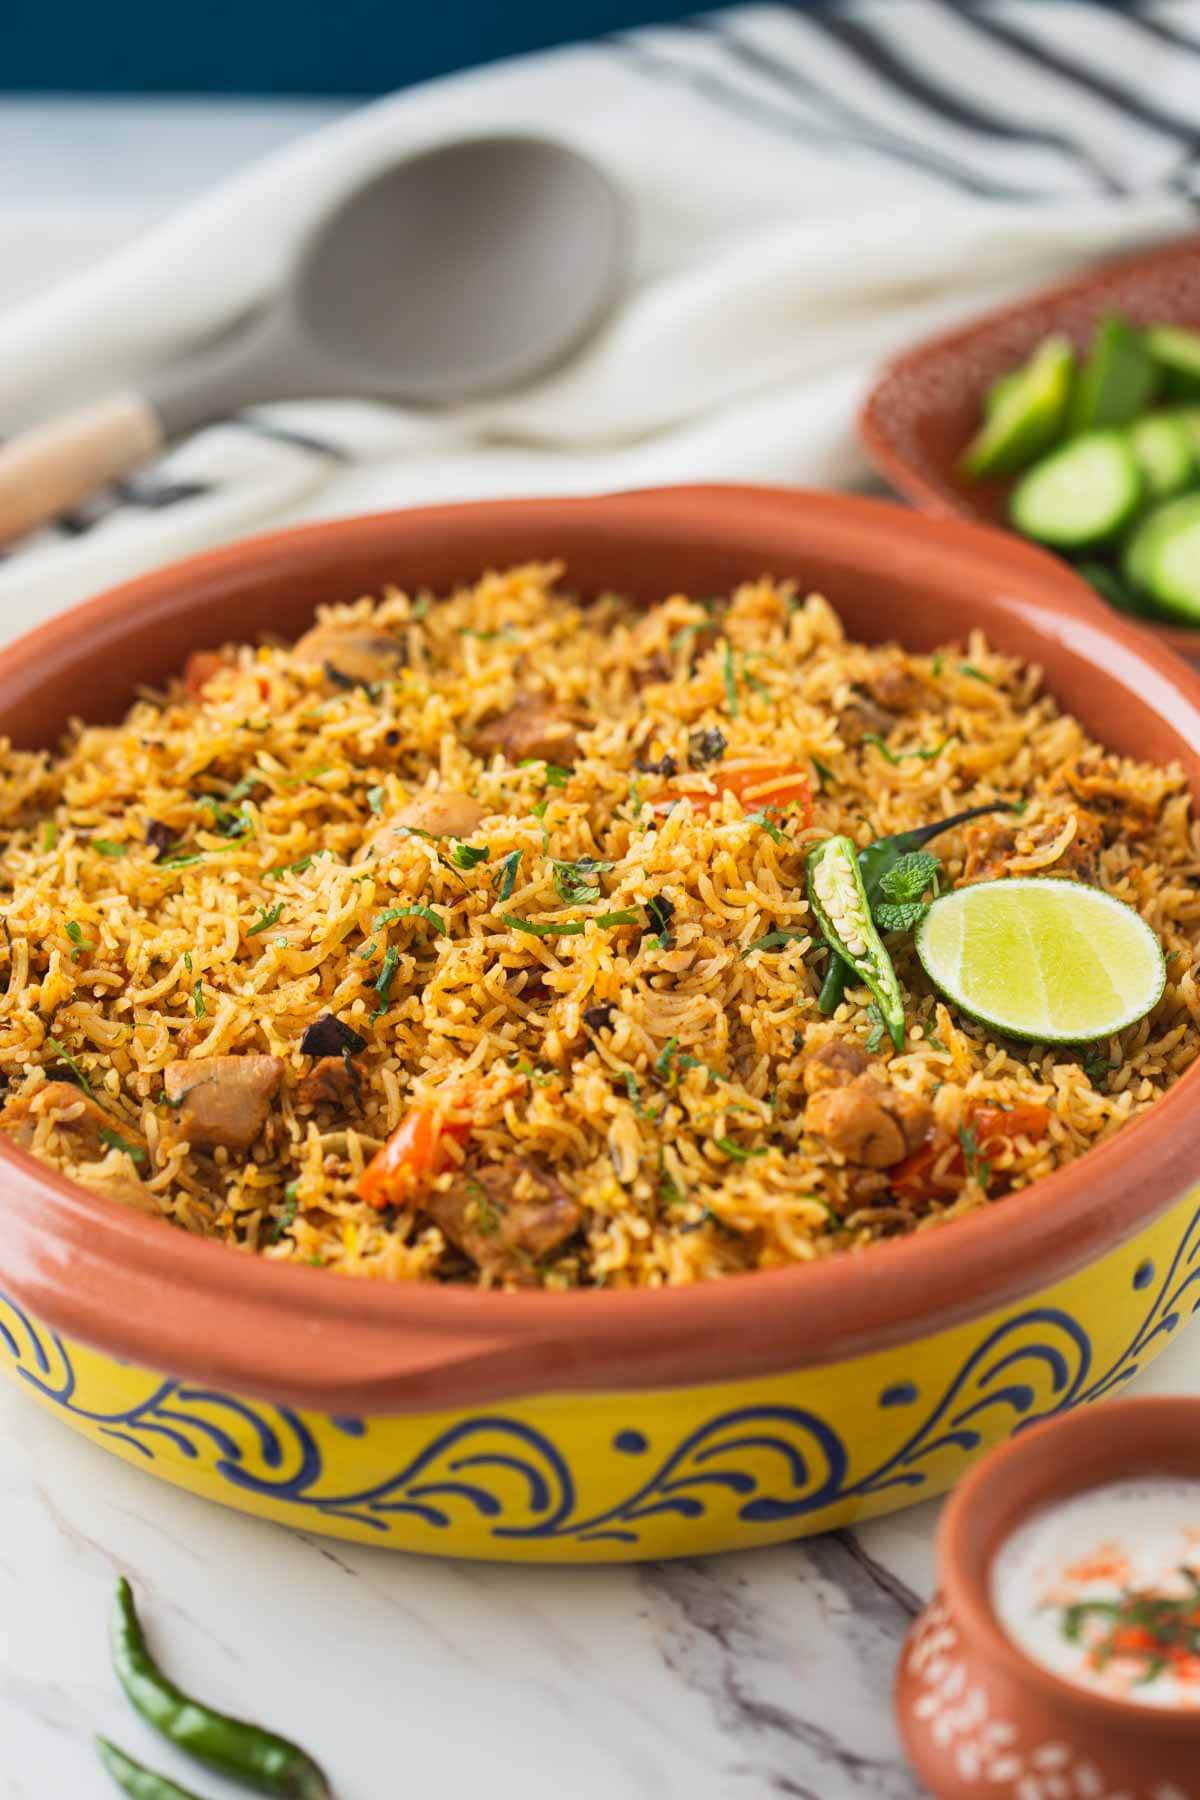 Authentic chicken biryani in a serving dish. Garnished with fresh green chili and a lemon slice.